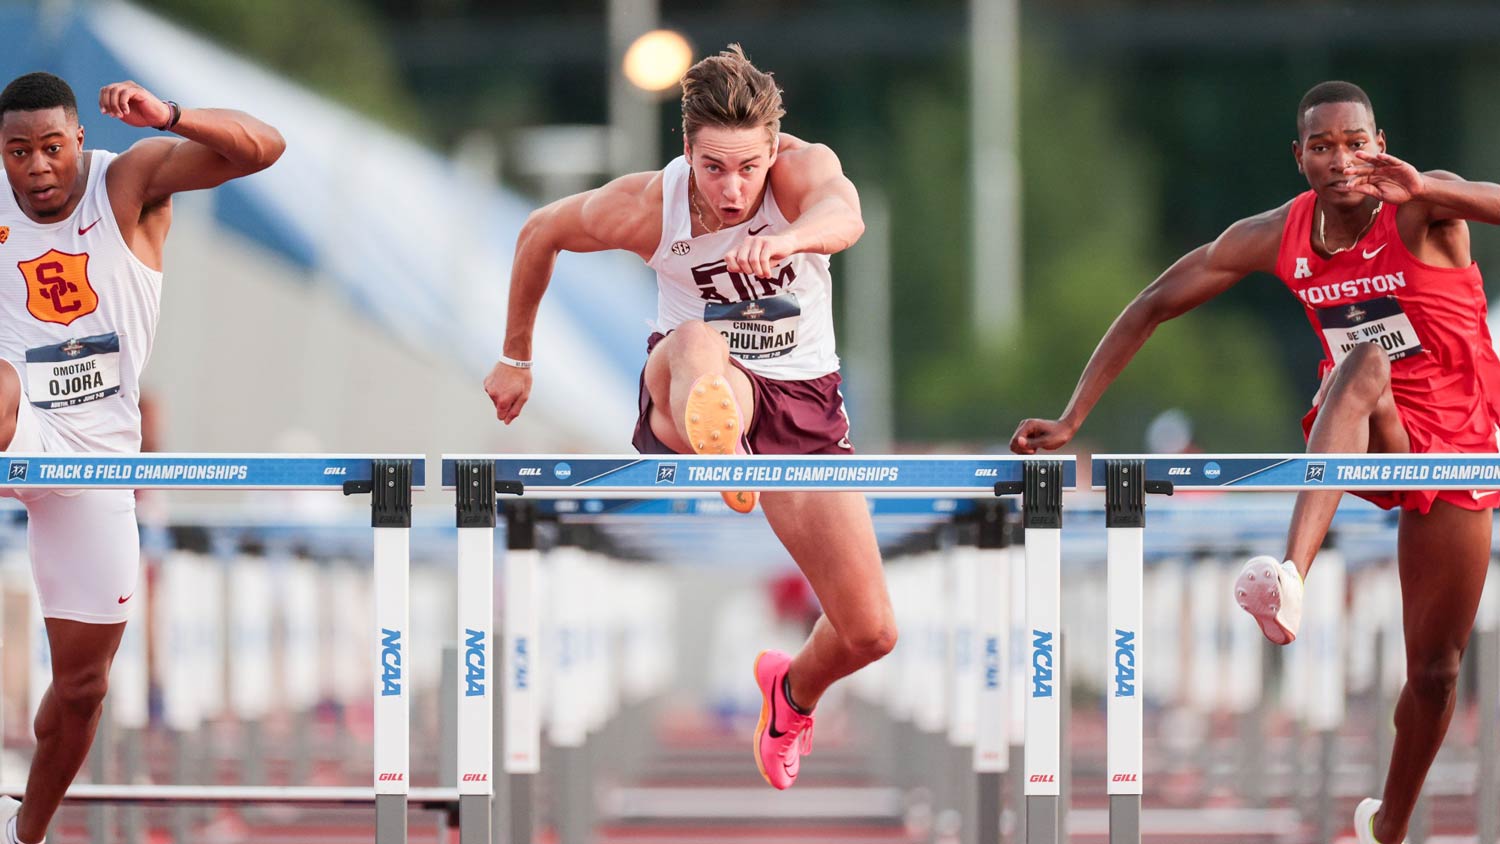 A Texas A&M track athlete leaps over a hurdle during a race